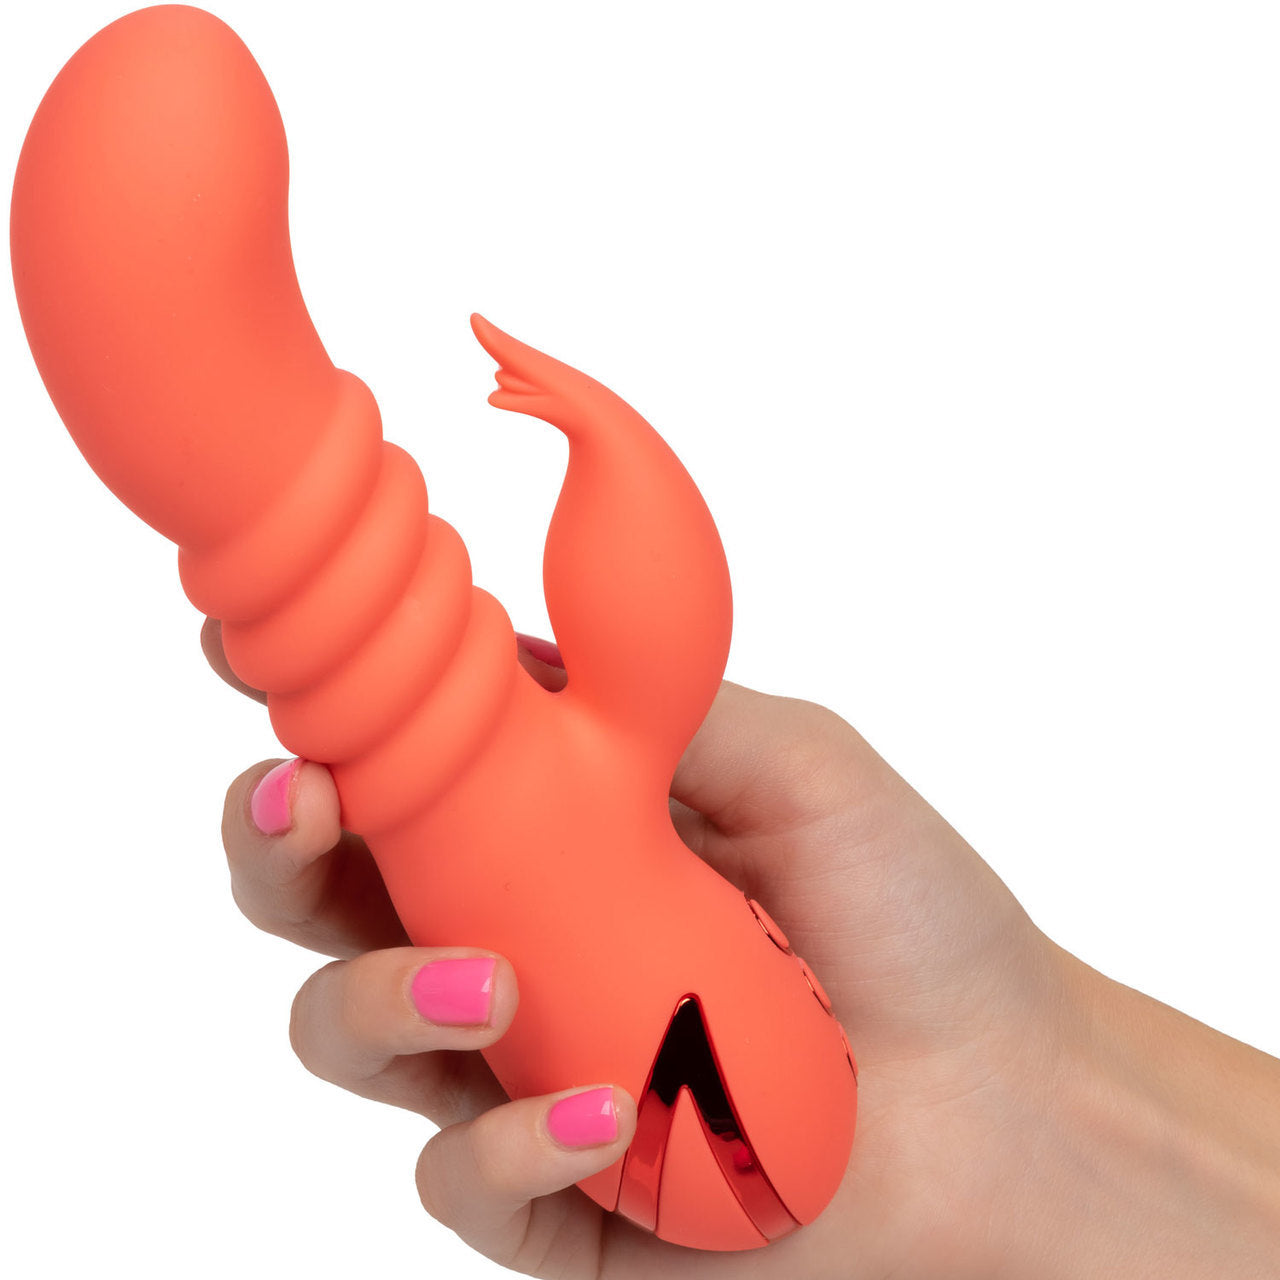 Orange vibrator with ribbed shaft, and attached clitoral arm diagonal in hand